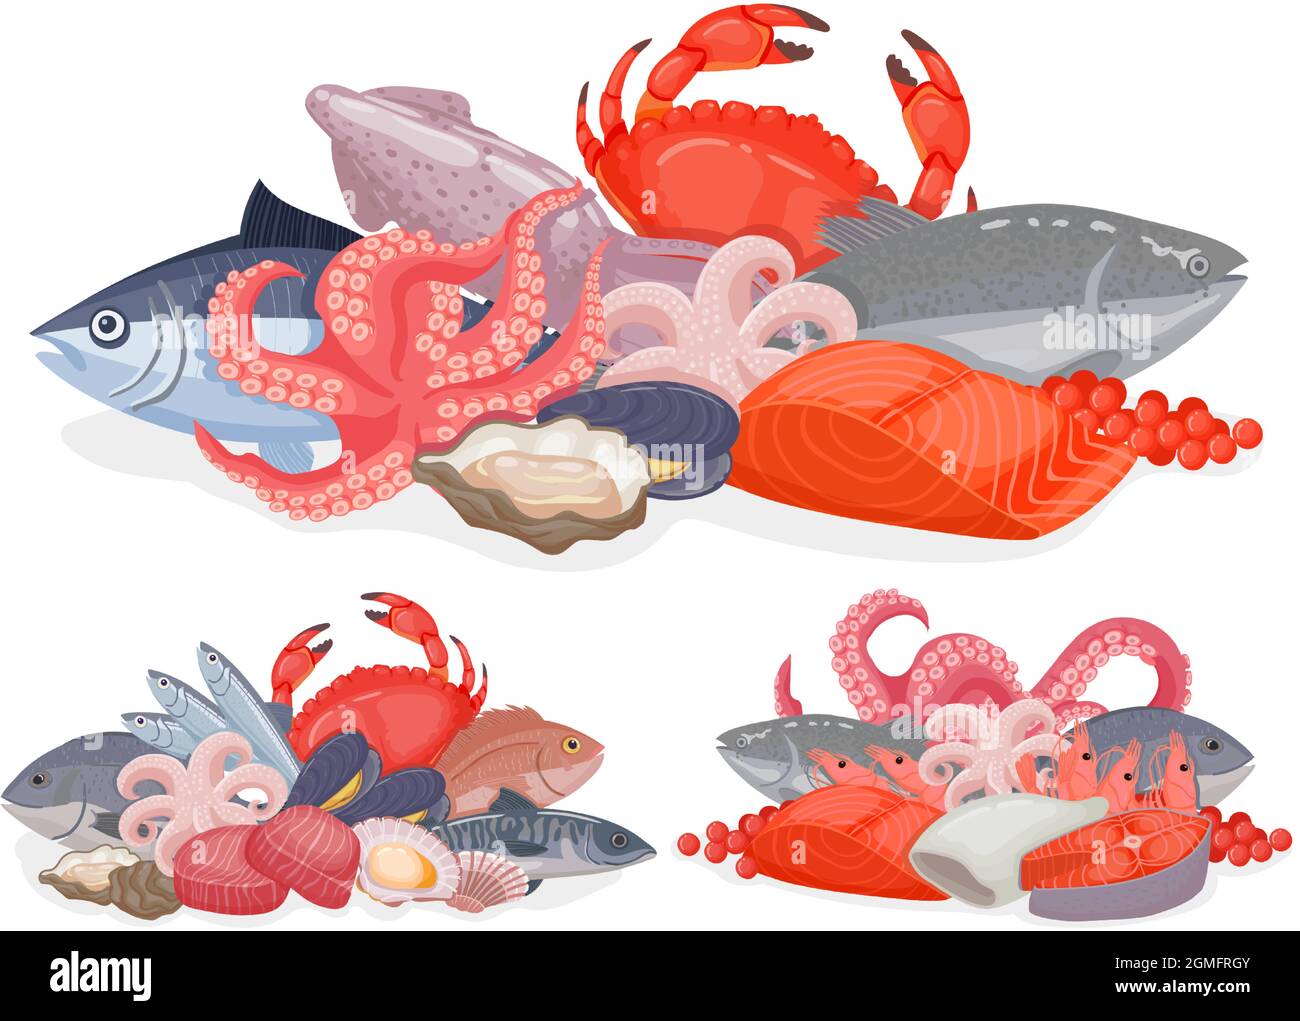 Cartoon seafood products design for menu, shop poster or package. Pile with ocean fish, lobster, oysters and crab. Marine food vector set Stock Vector